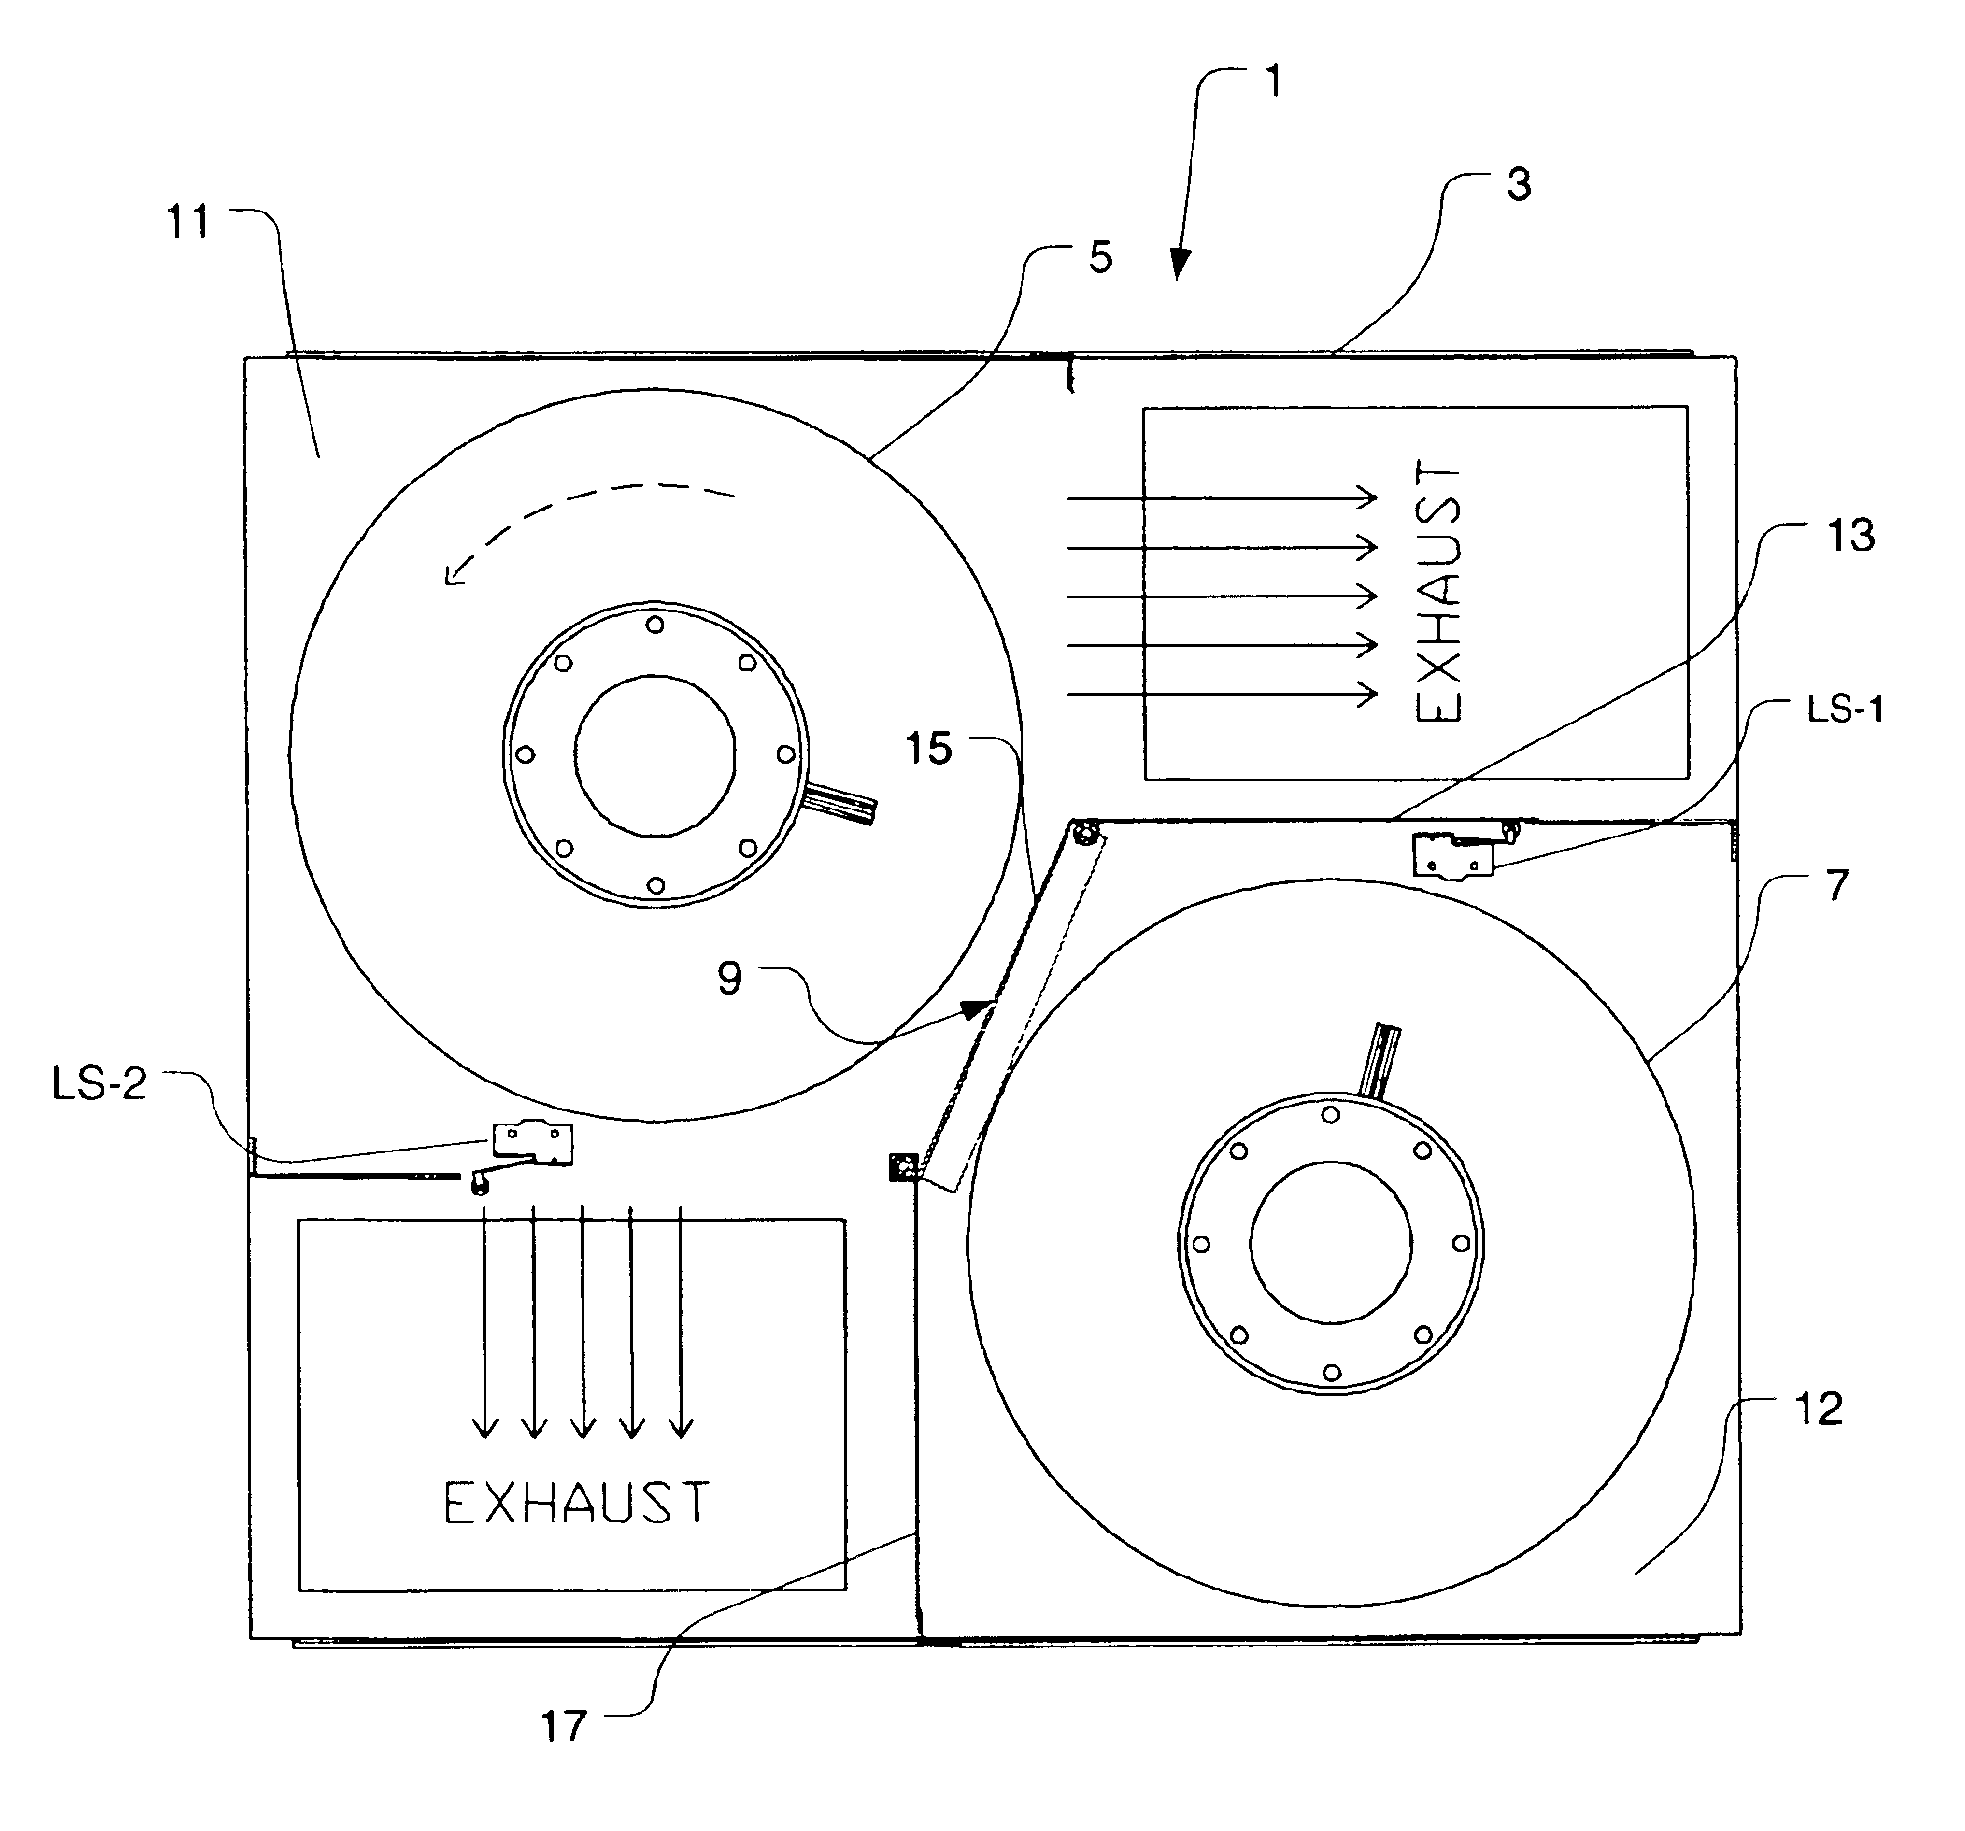 Apparatus for continuous cooling of electrical powered equipment